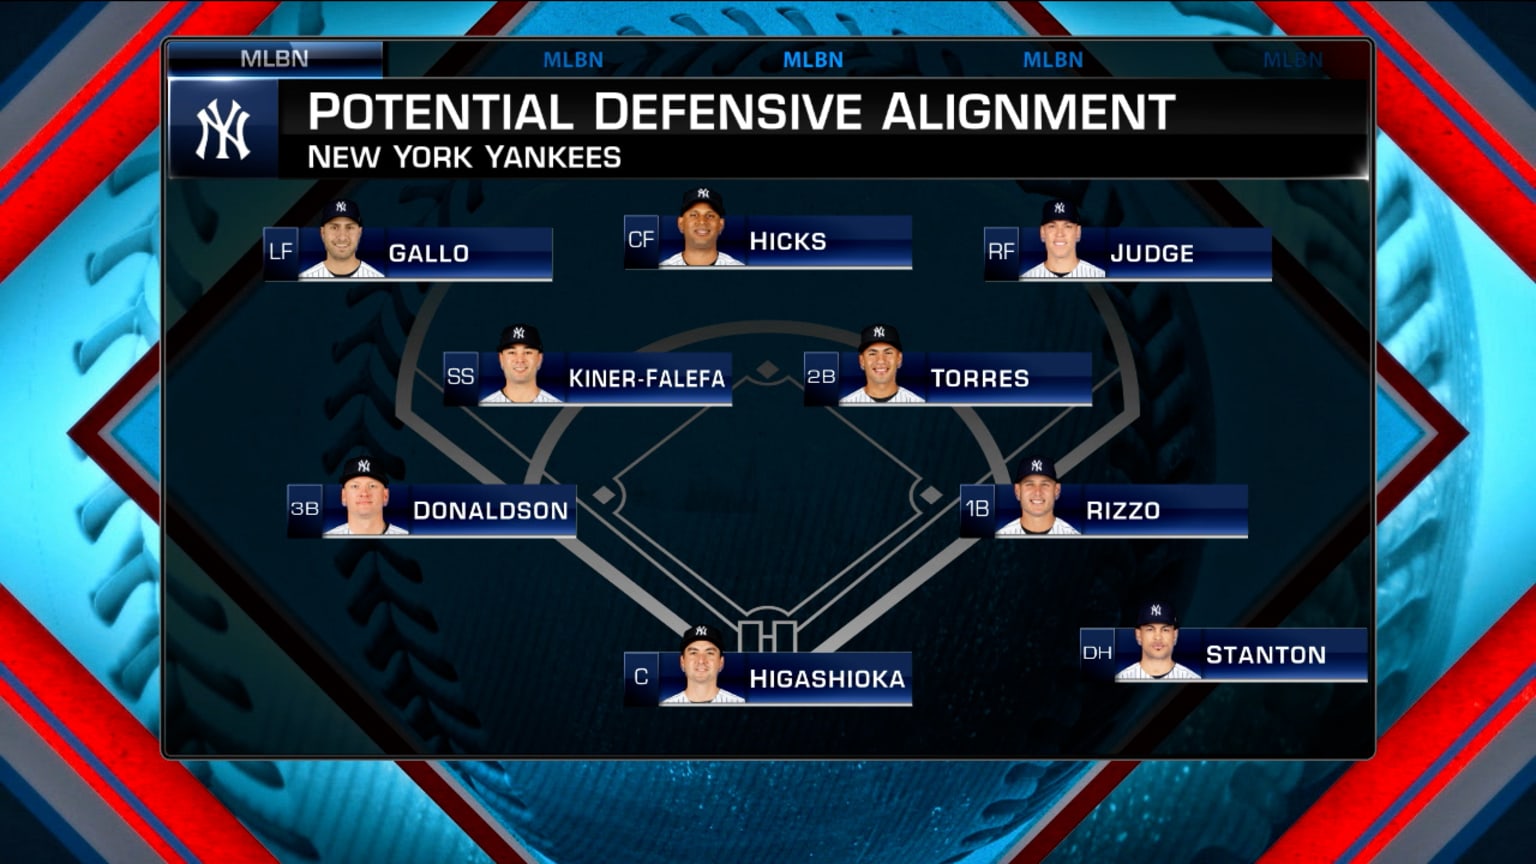 Hot Stove on the 2022 Yankees 03/22/2022 New York Yankees